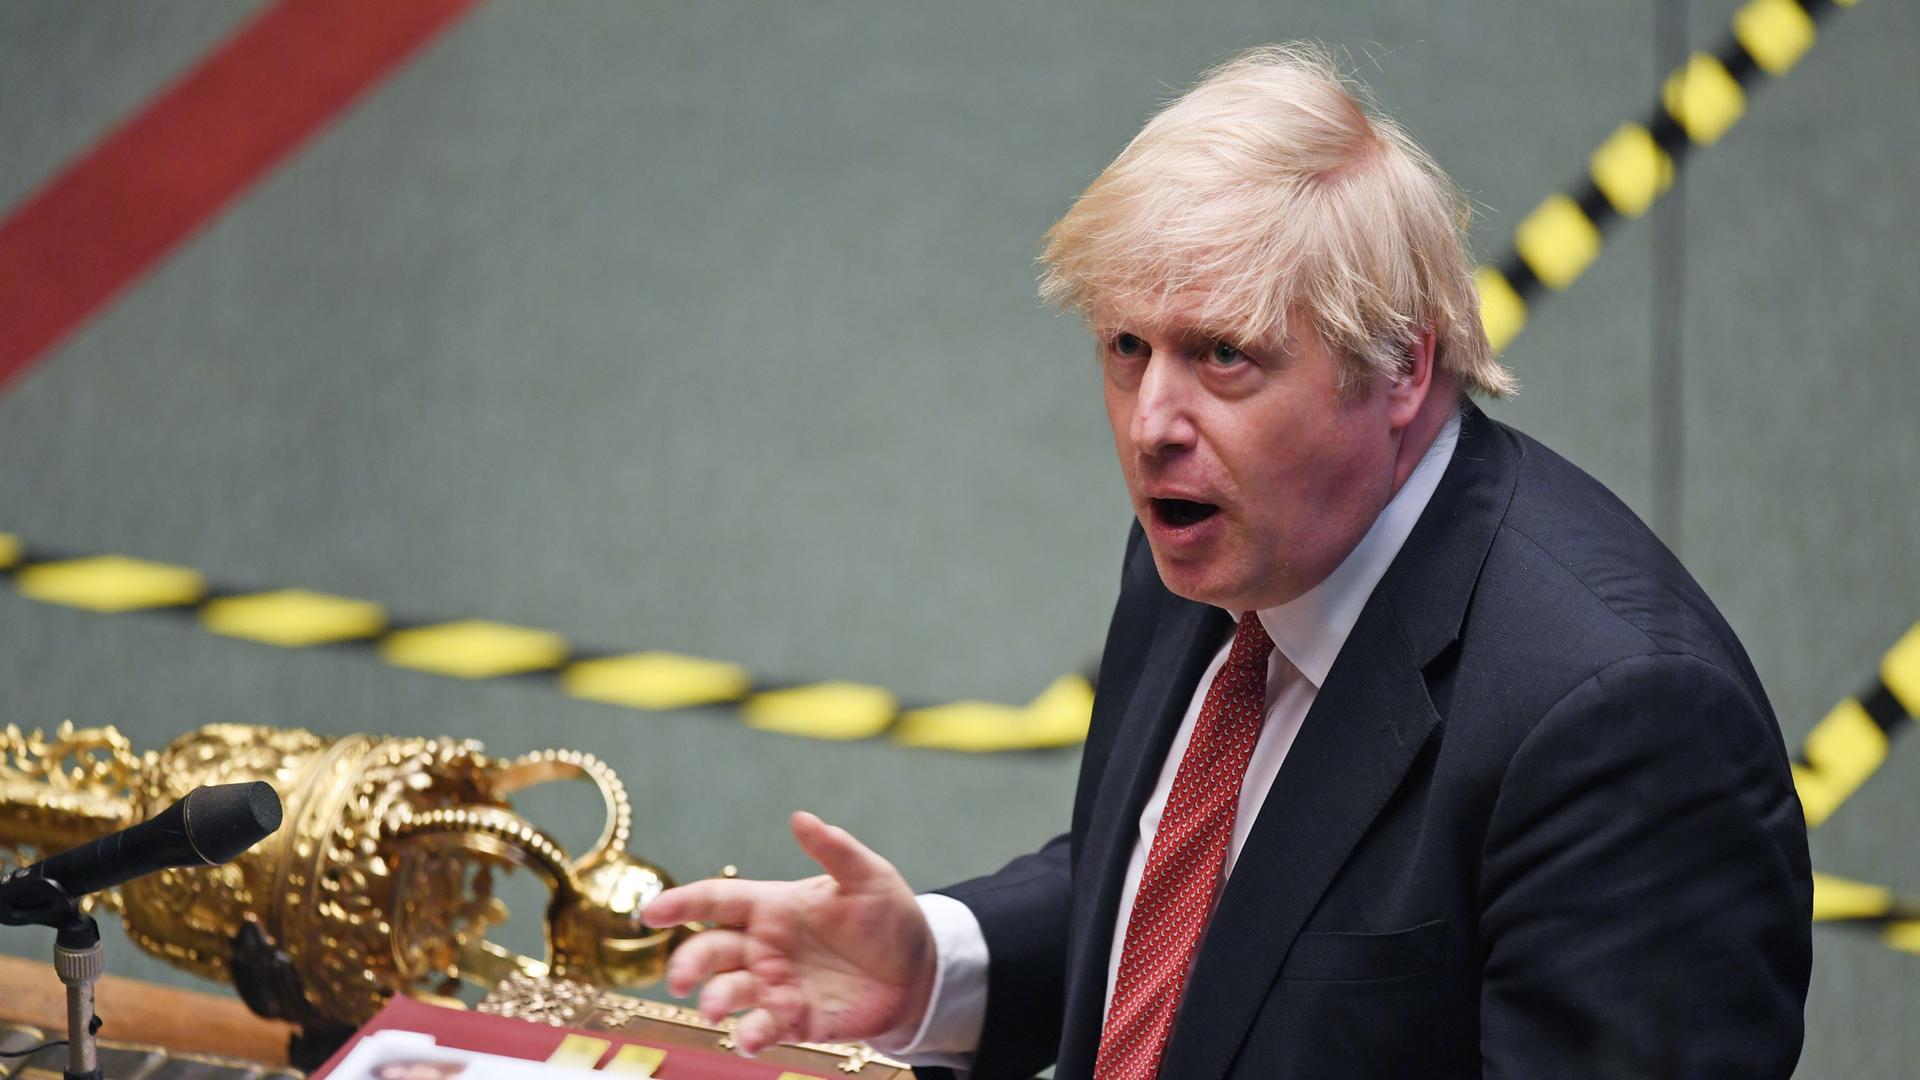 Britain's Prime Minister Boris Johnson is shown in a photograph from above standing at a podium with his hand outstretched.